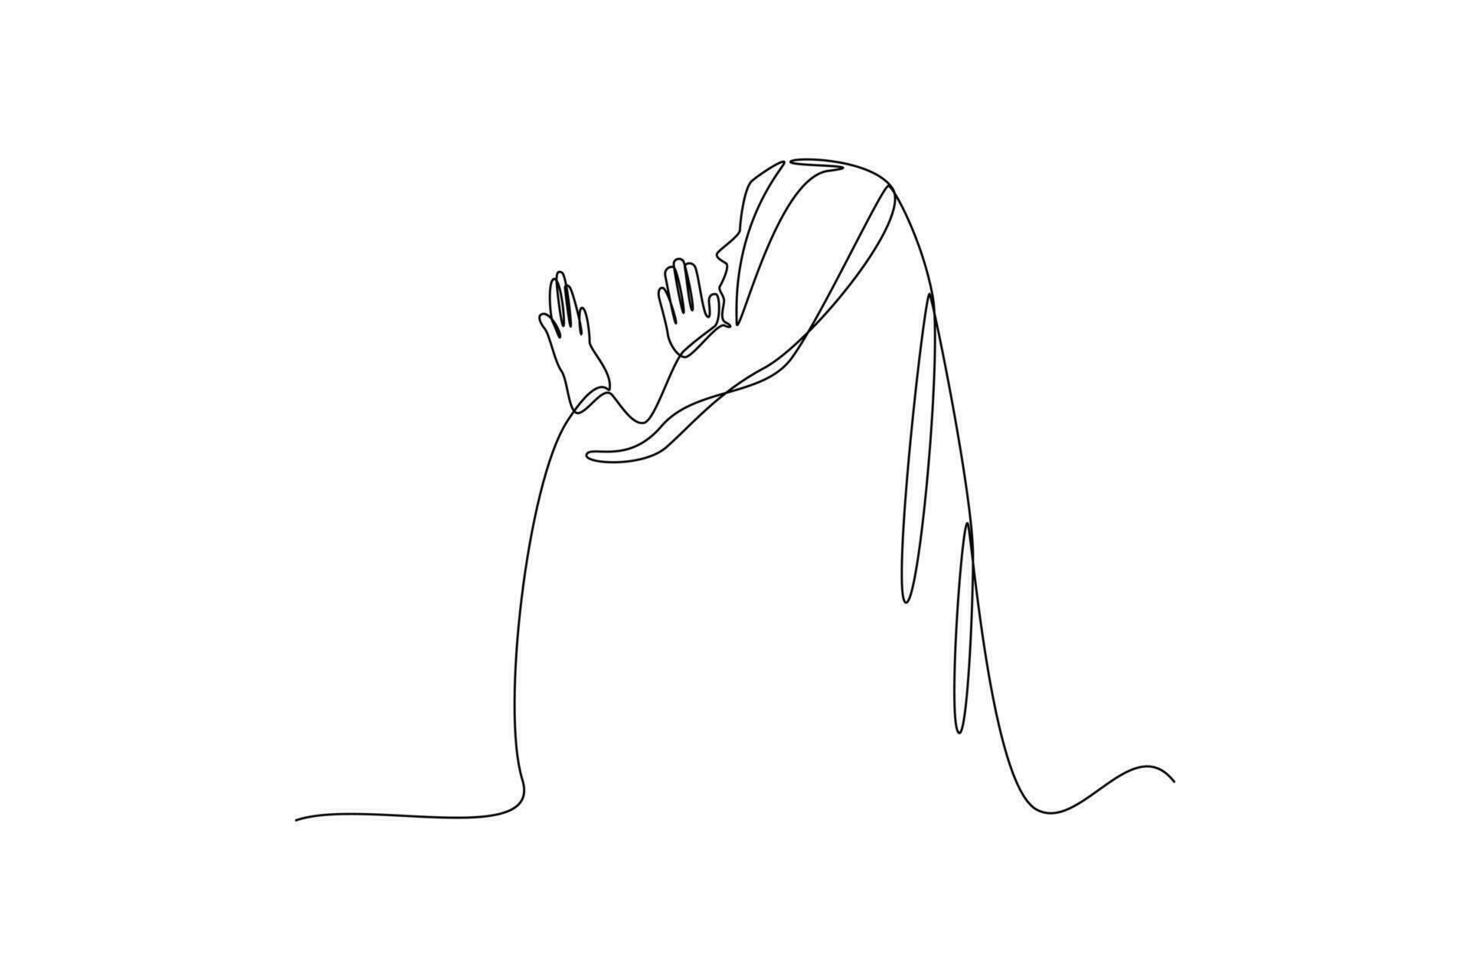 Single one-line drawing a woman praying in Mecca. Hajj and Umrah activity concept. Continuous line drawing illustration vector